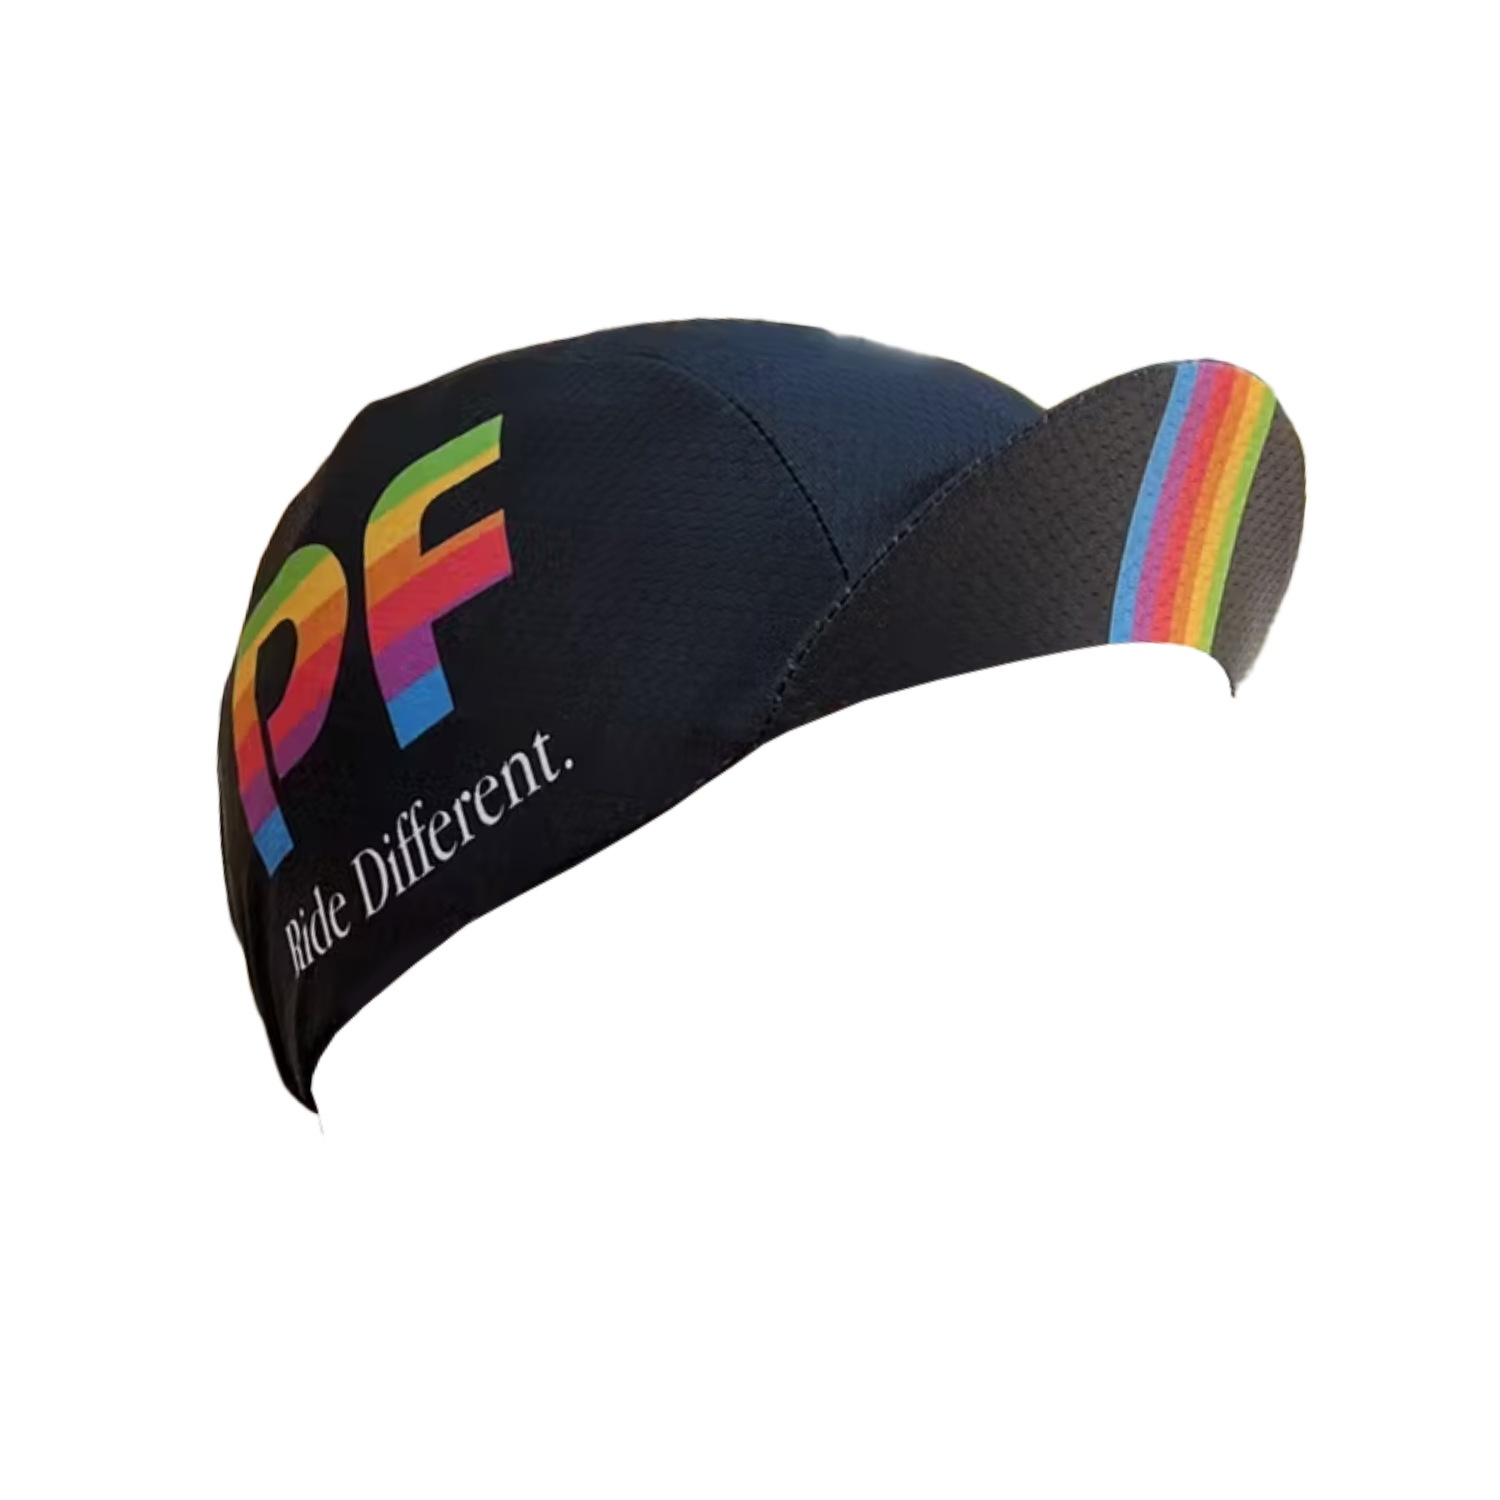 Cycling Cap with PF logo and text "Ride Different"